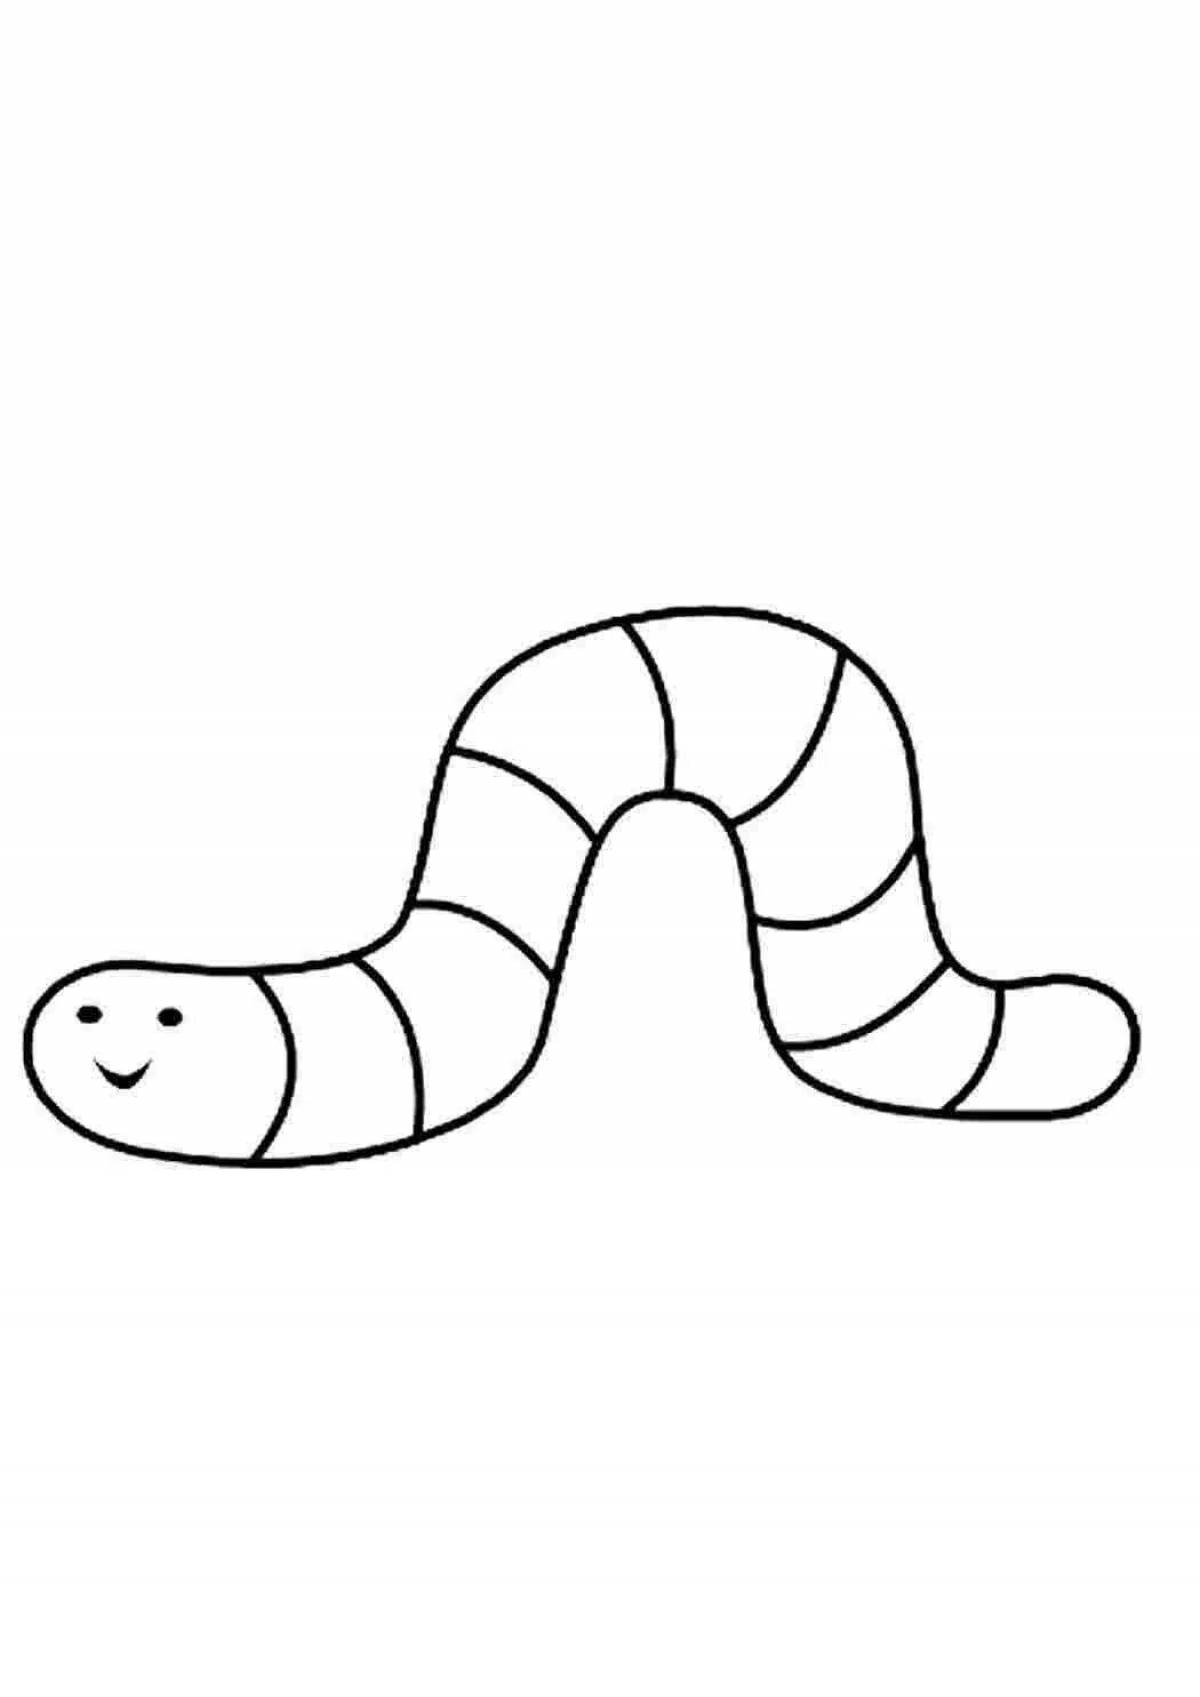 Fancy worm coloring for kids